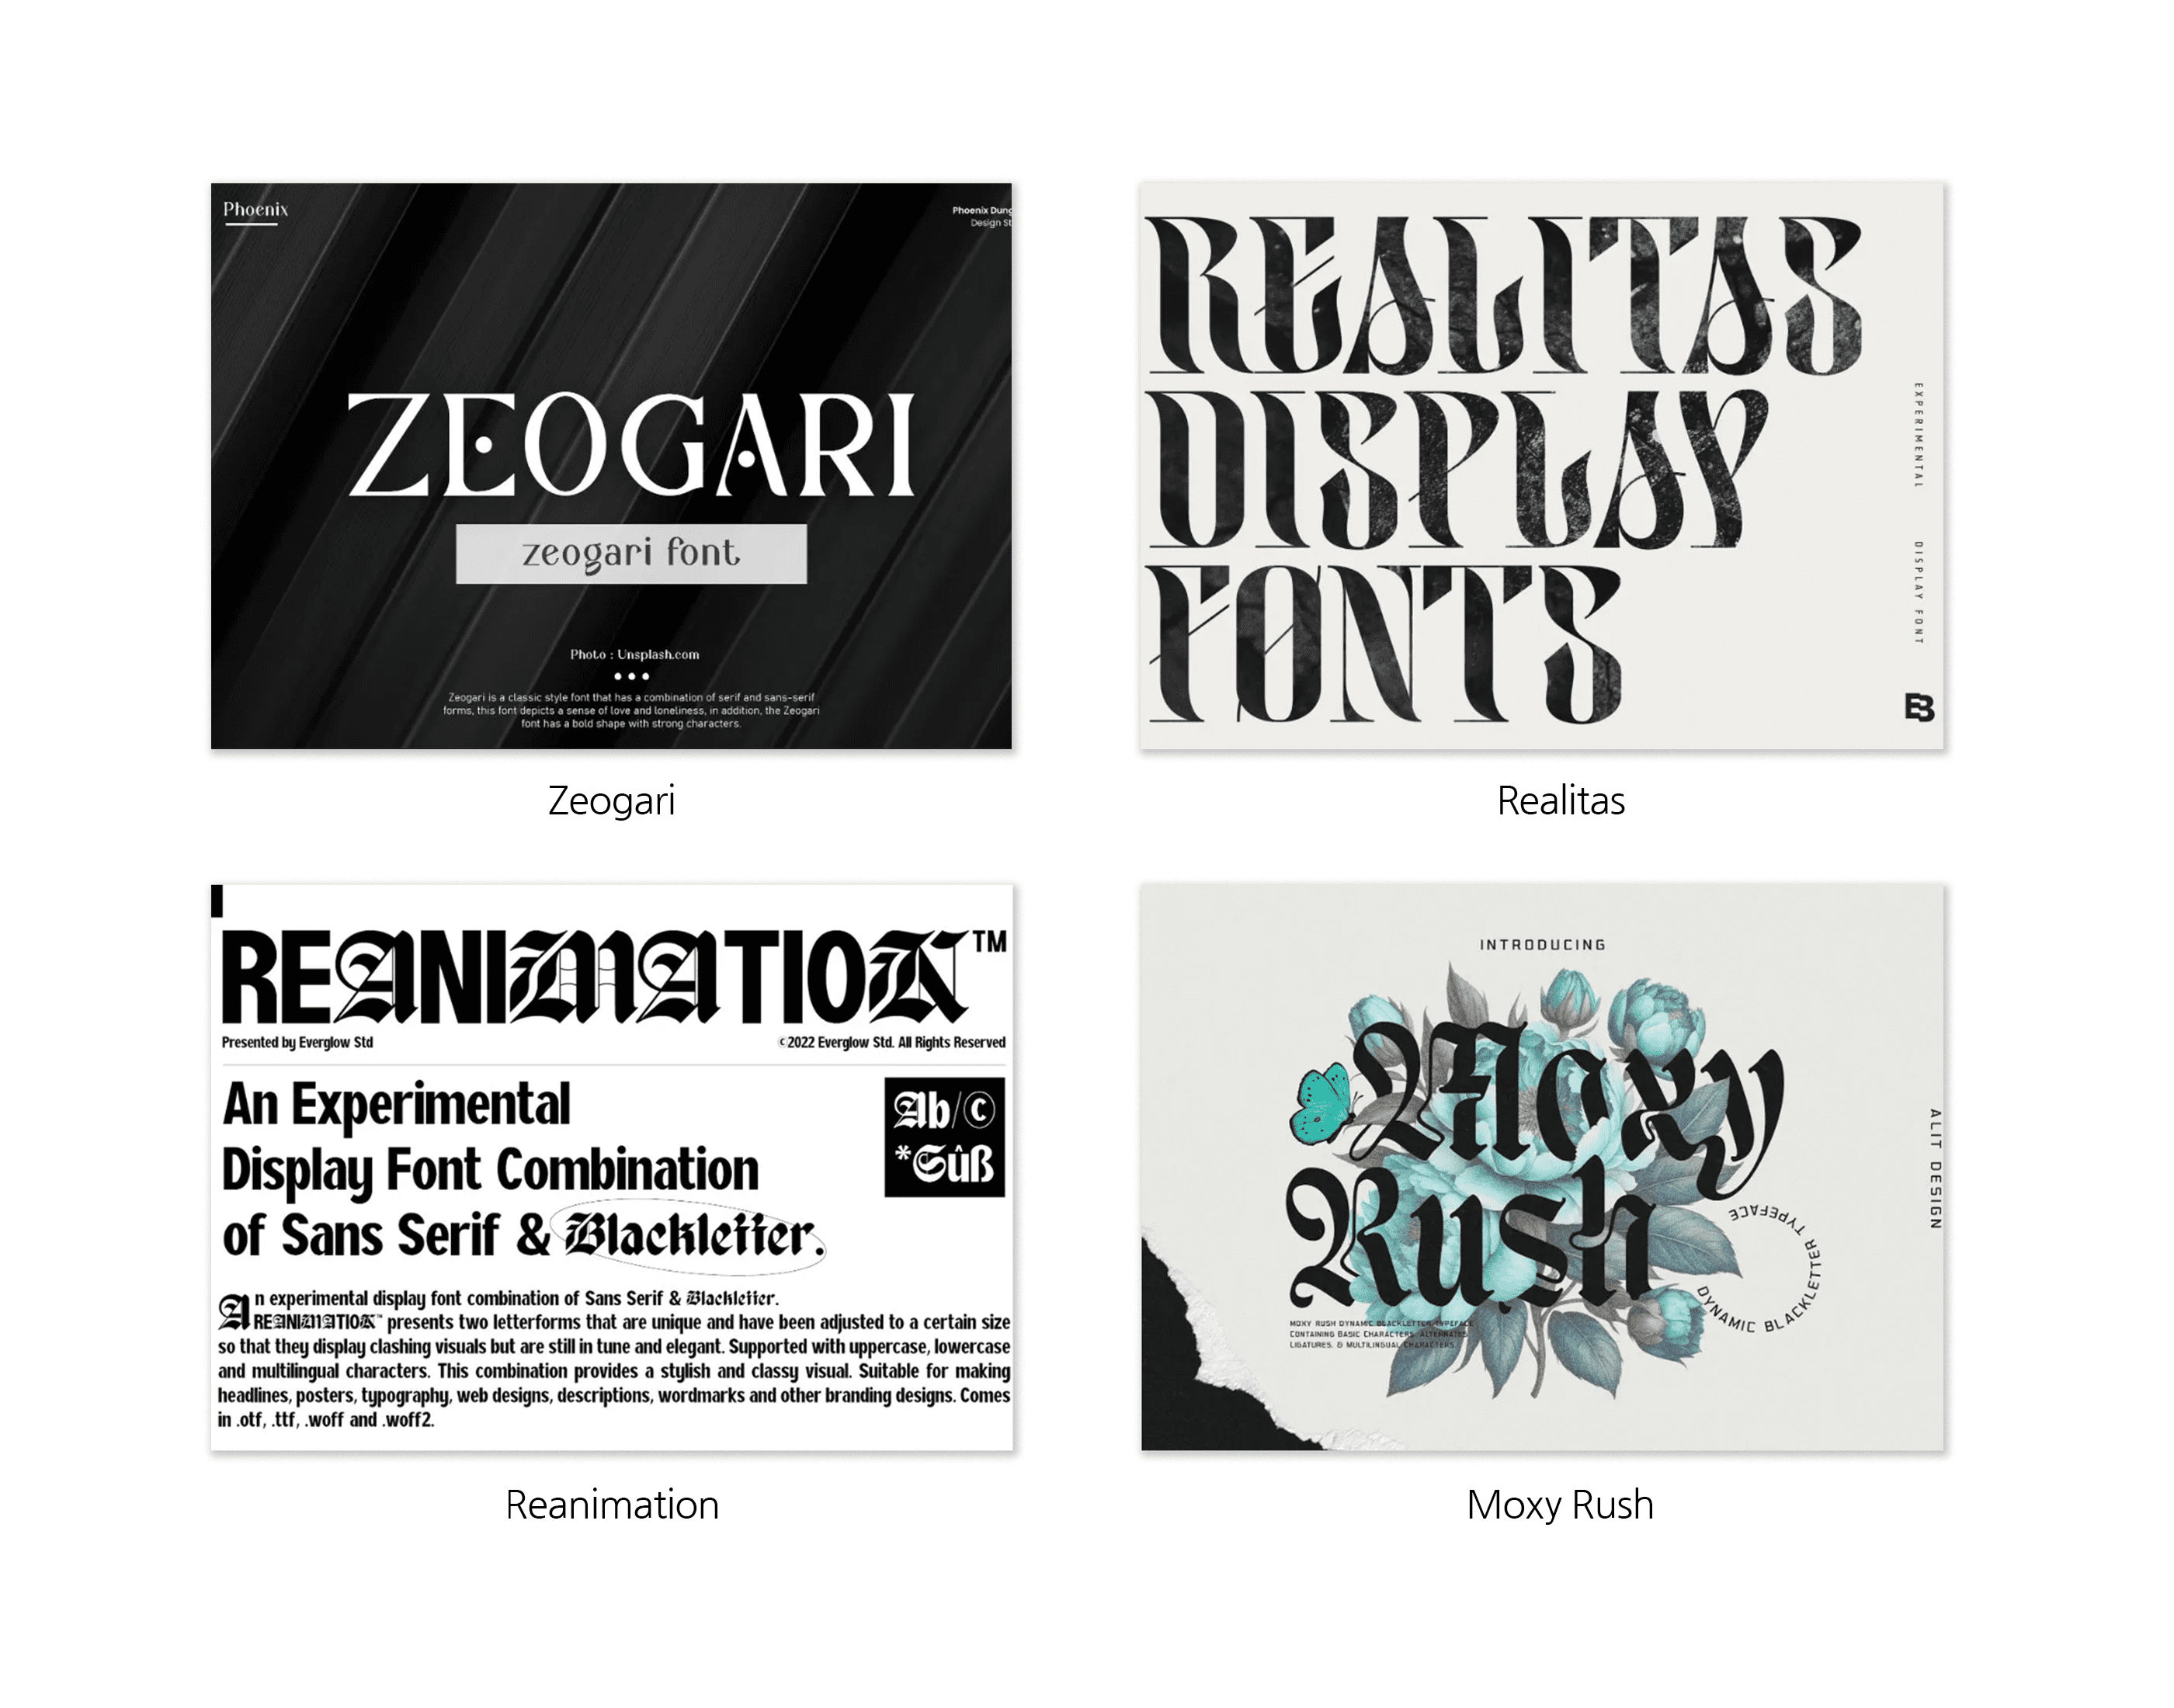 2024-font-trend-modern-gothic-zeogari-font-and-realitas-font-and-reanimation-font-and-moxy-rush-font